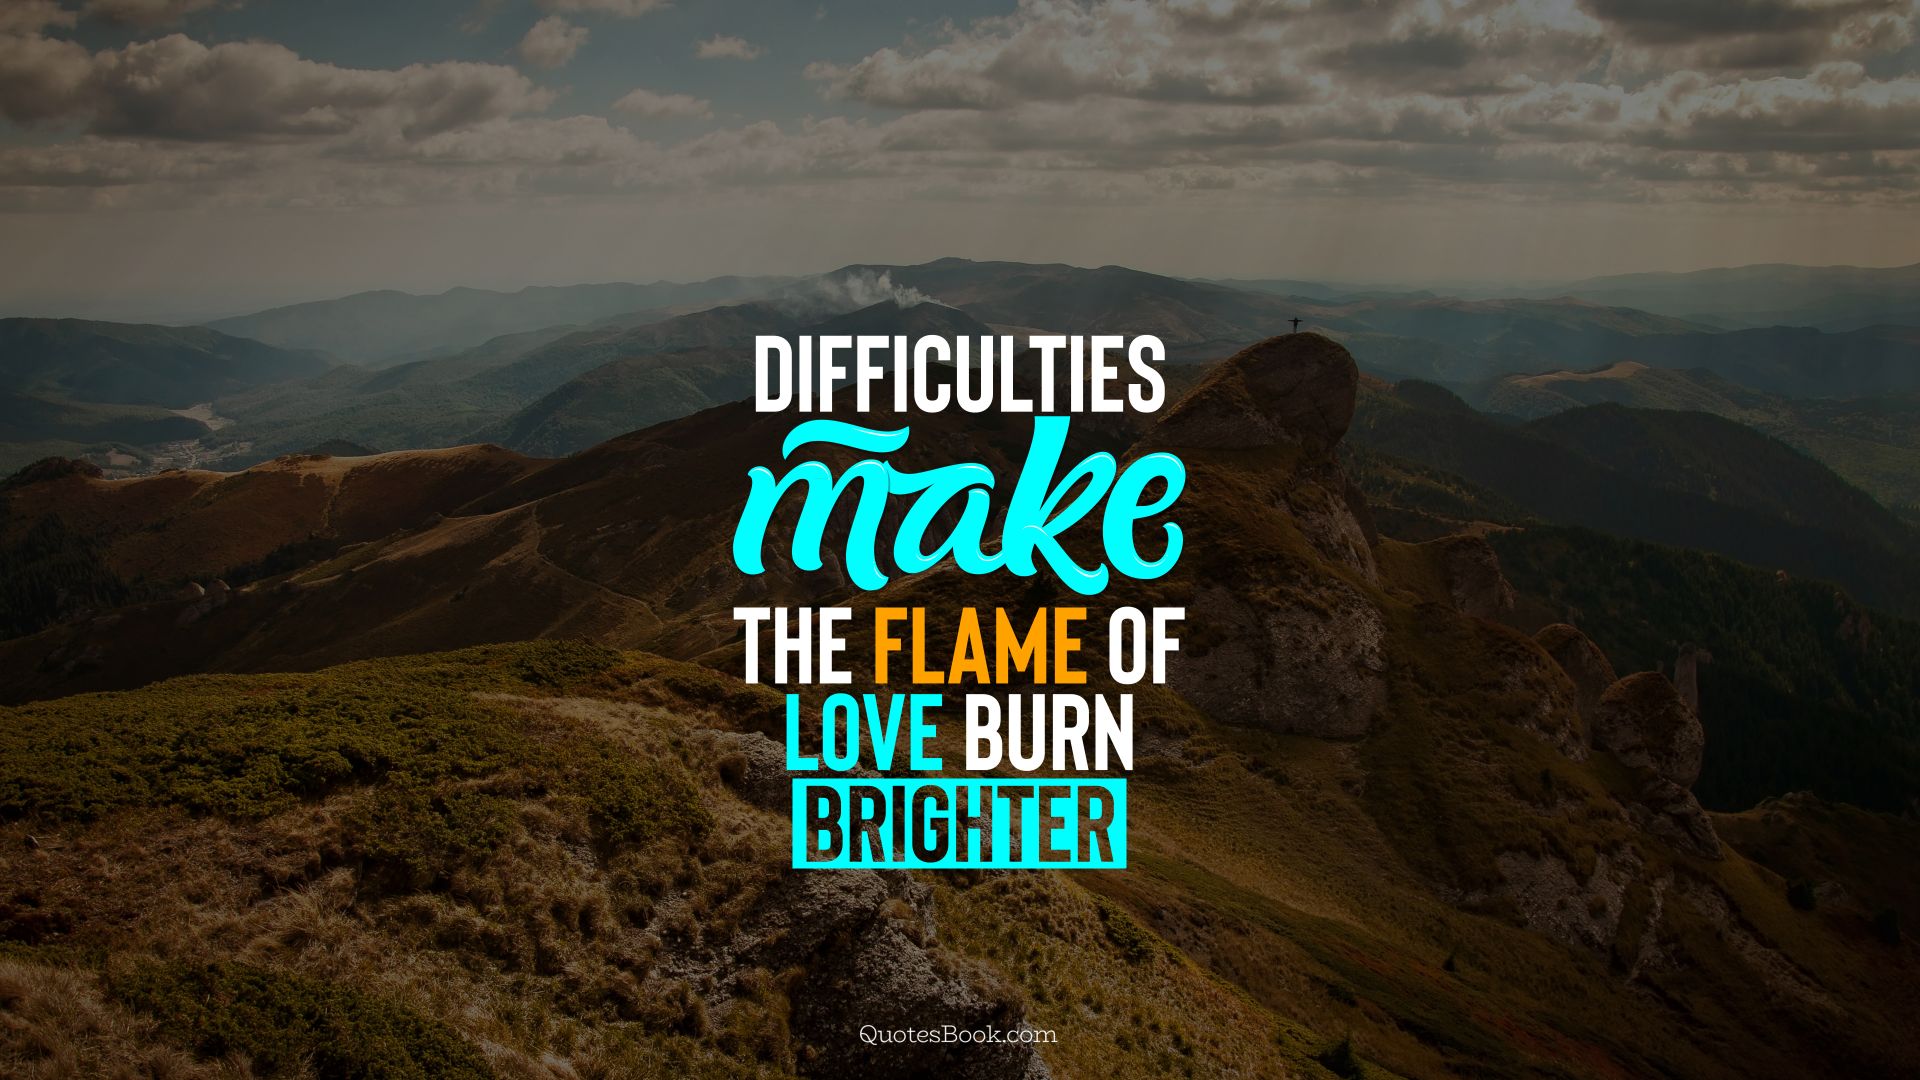 Difficulties make the flame of love burn brighter. - Quote by QuotesBook